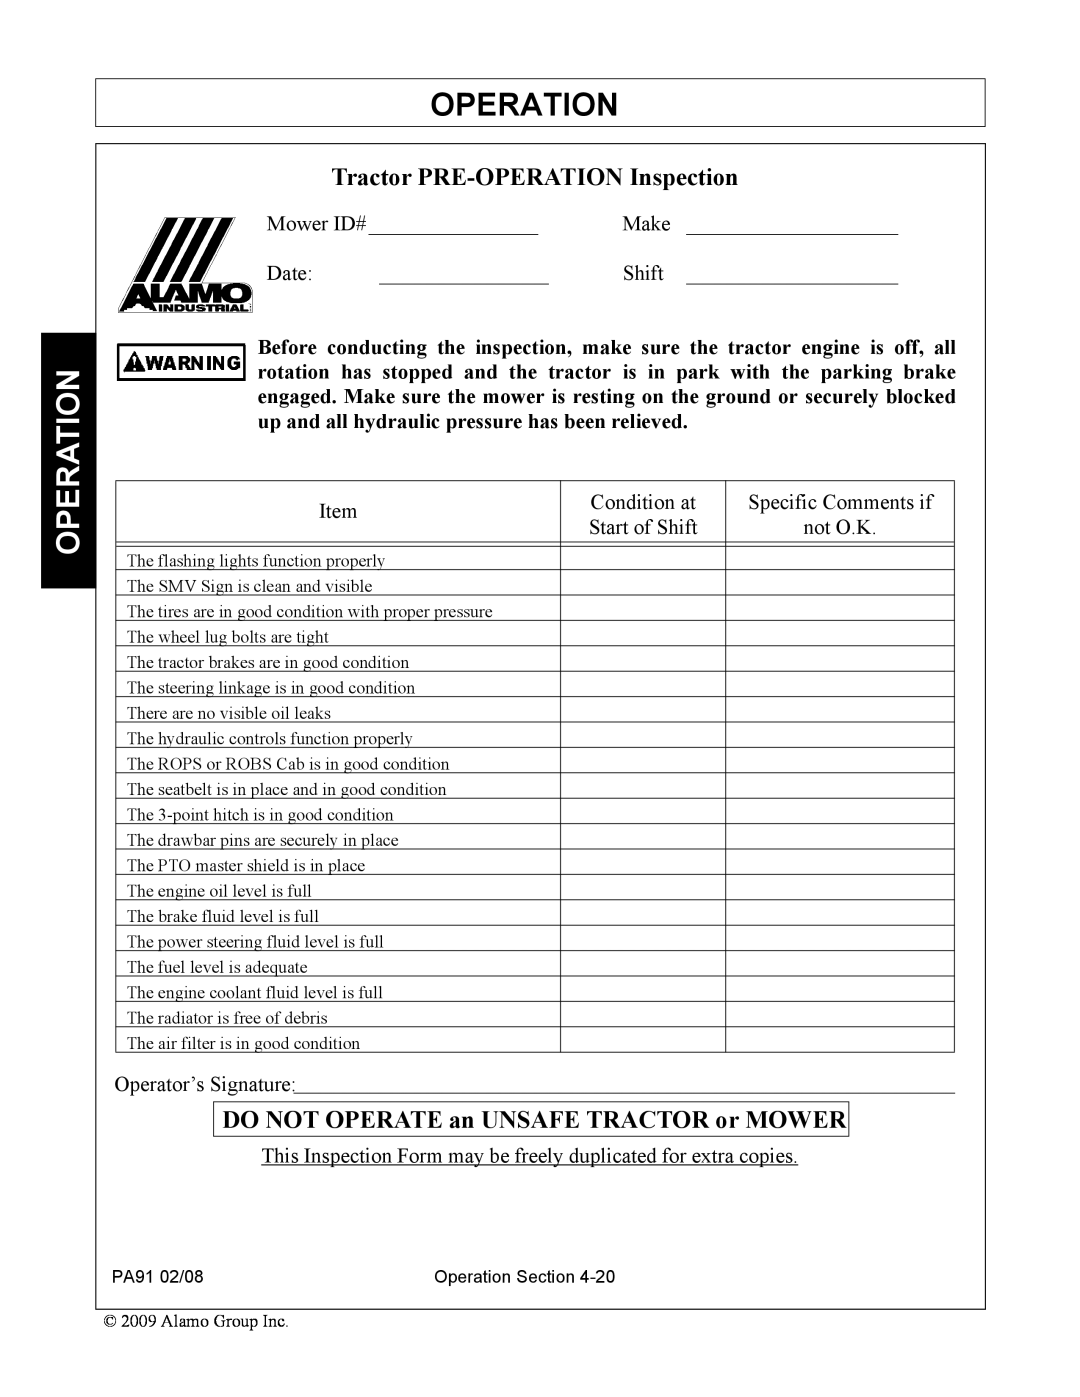 Alamo 7191852C manual Tractor PRE-OPERATIONInspection, Operation, DO NOT OPERATE an UNSAFE TRACTOR or MOWER 